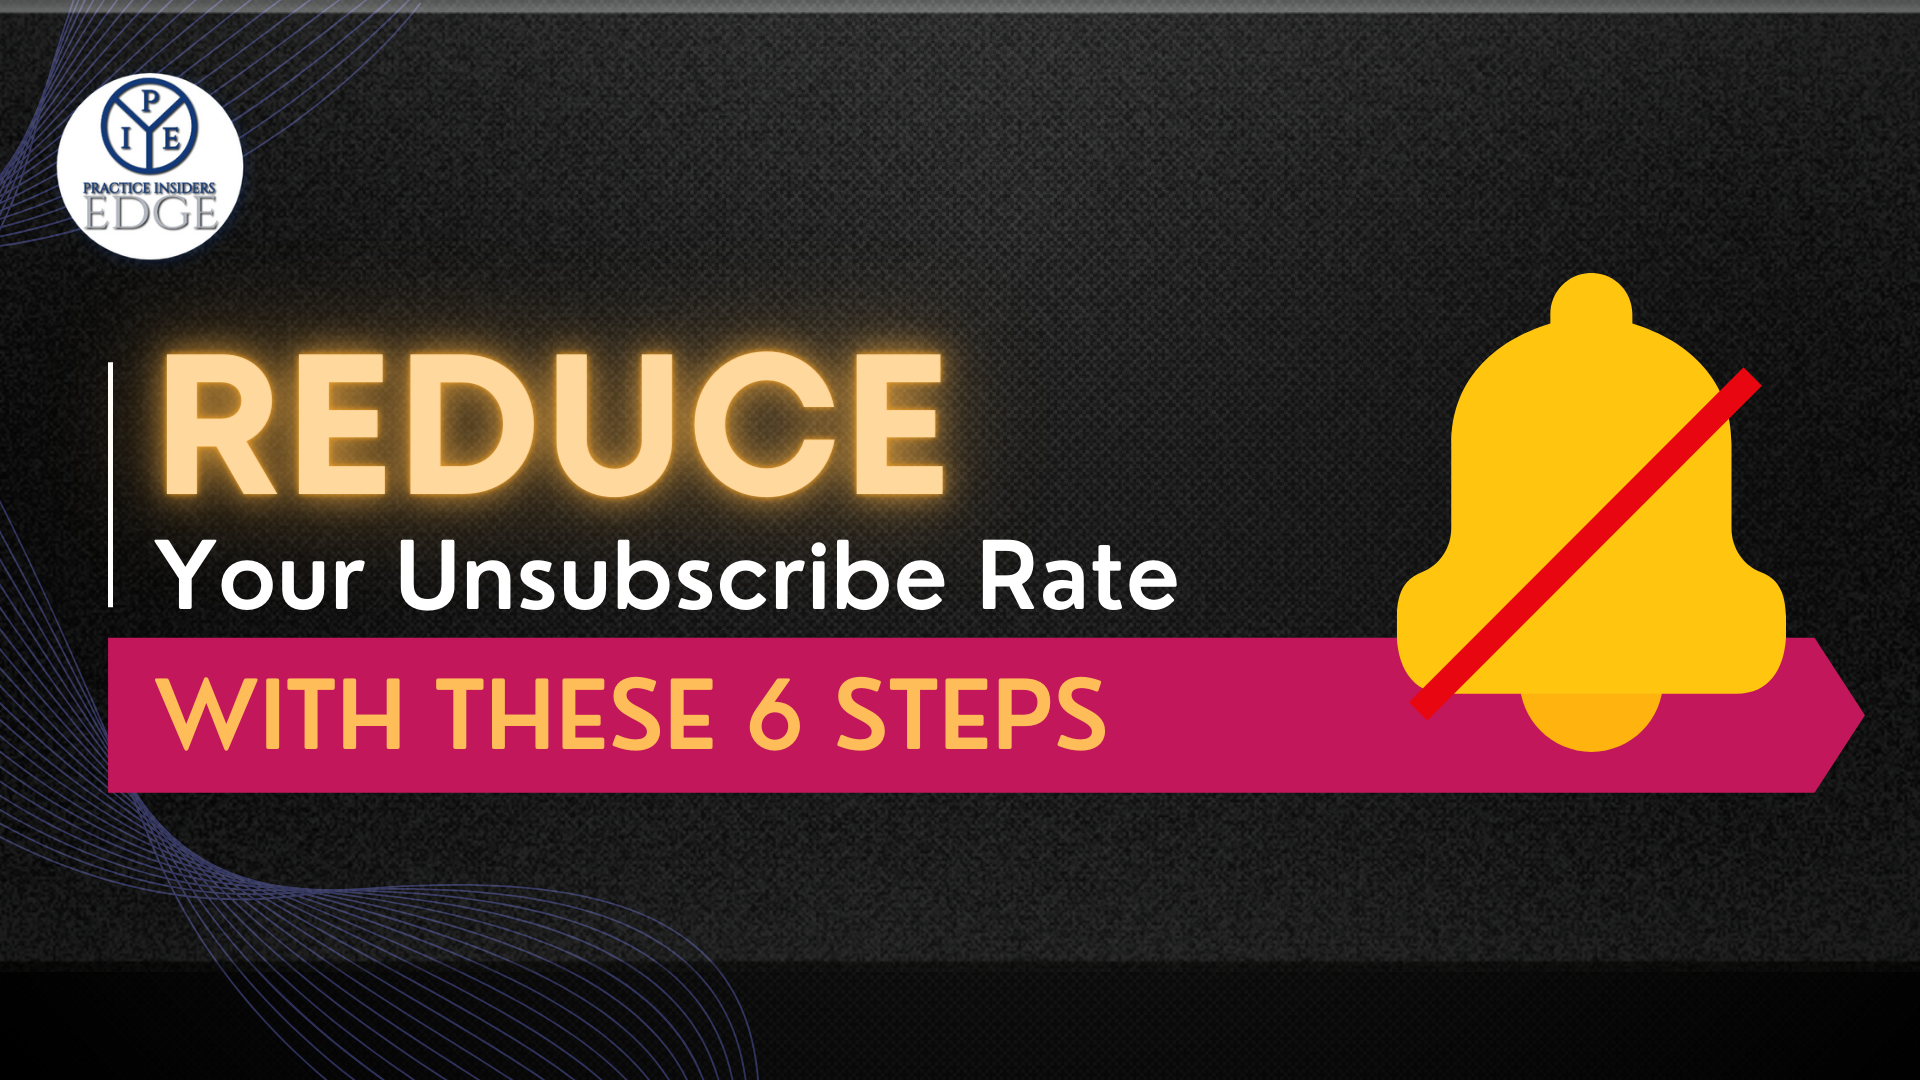 Reduce Your Unsubscribe Rate With These 6 Steps